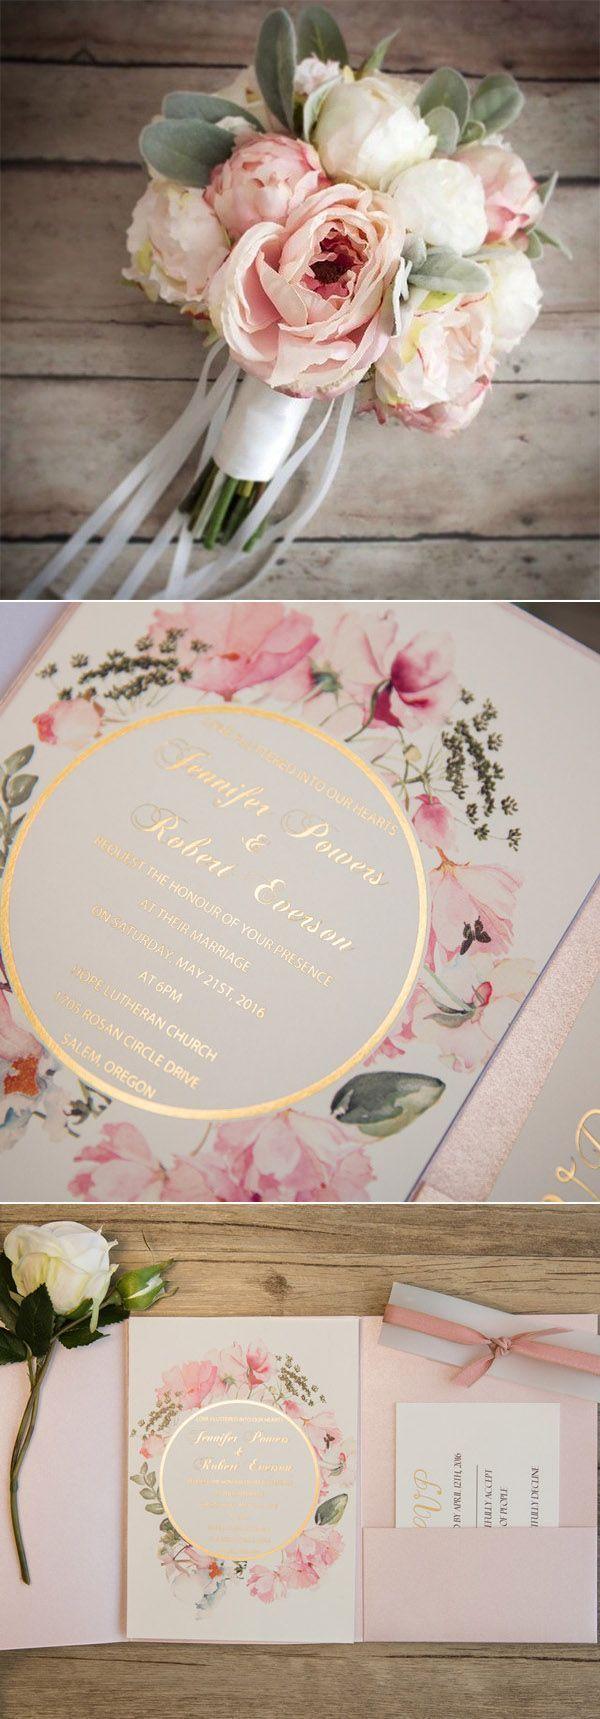 Hochzeit - Pink And Gold Glitter Pocket Wedding Invitations With Flowers In Watercolors EWPI209